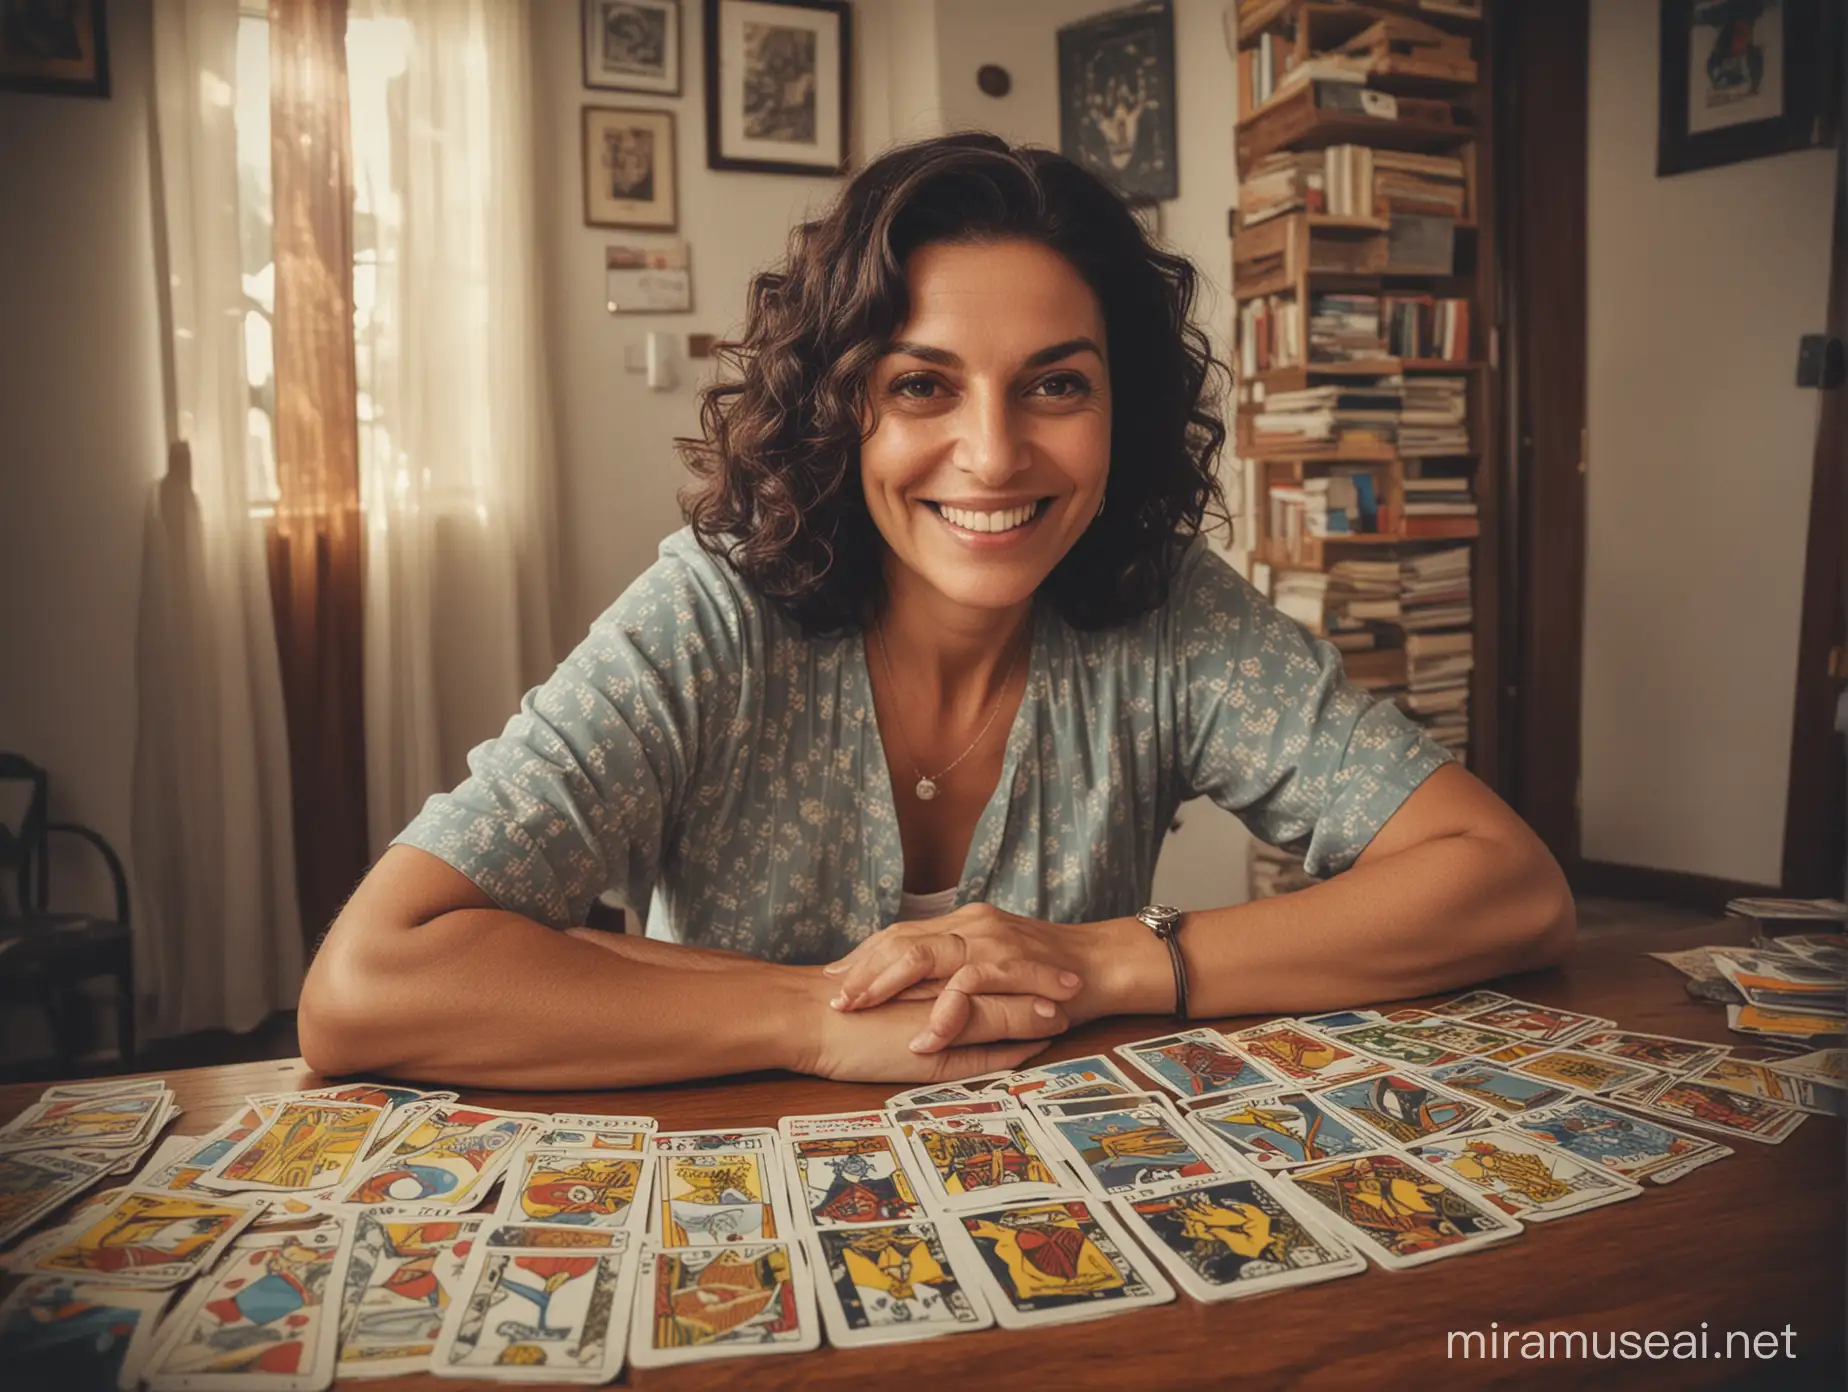 Middleaged Brazilian Woman Smiling and Playing Tarot Cards in Fisheye Lens Photo